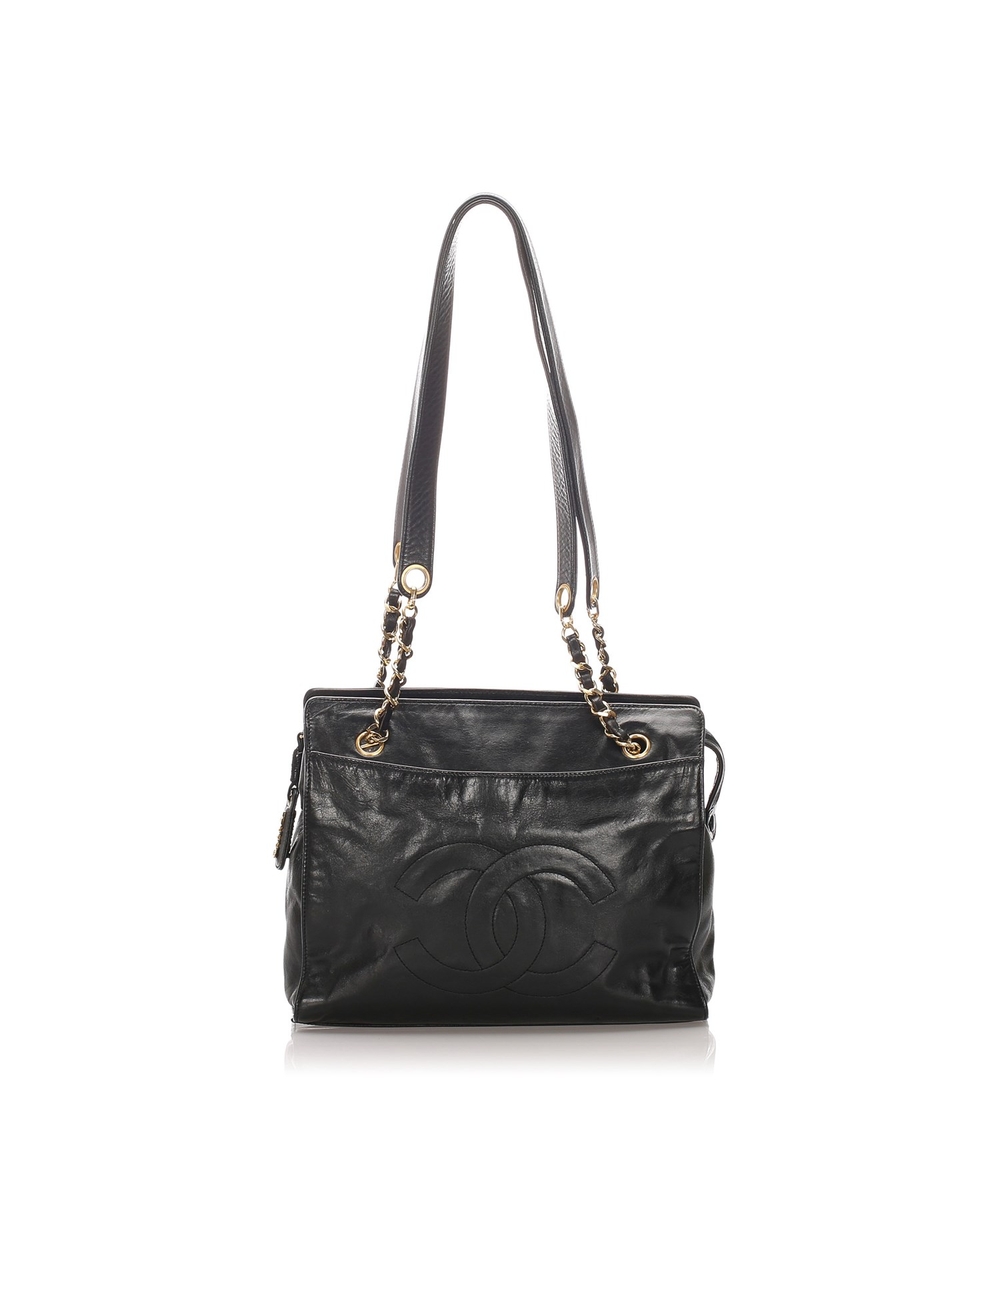 This tote bag features a lambskin leather body, a front exterior slip compartment, flat leather hand